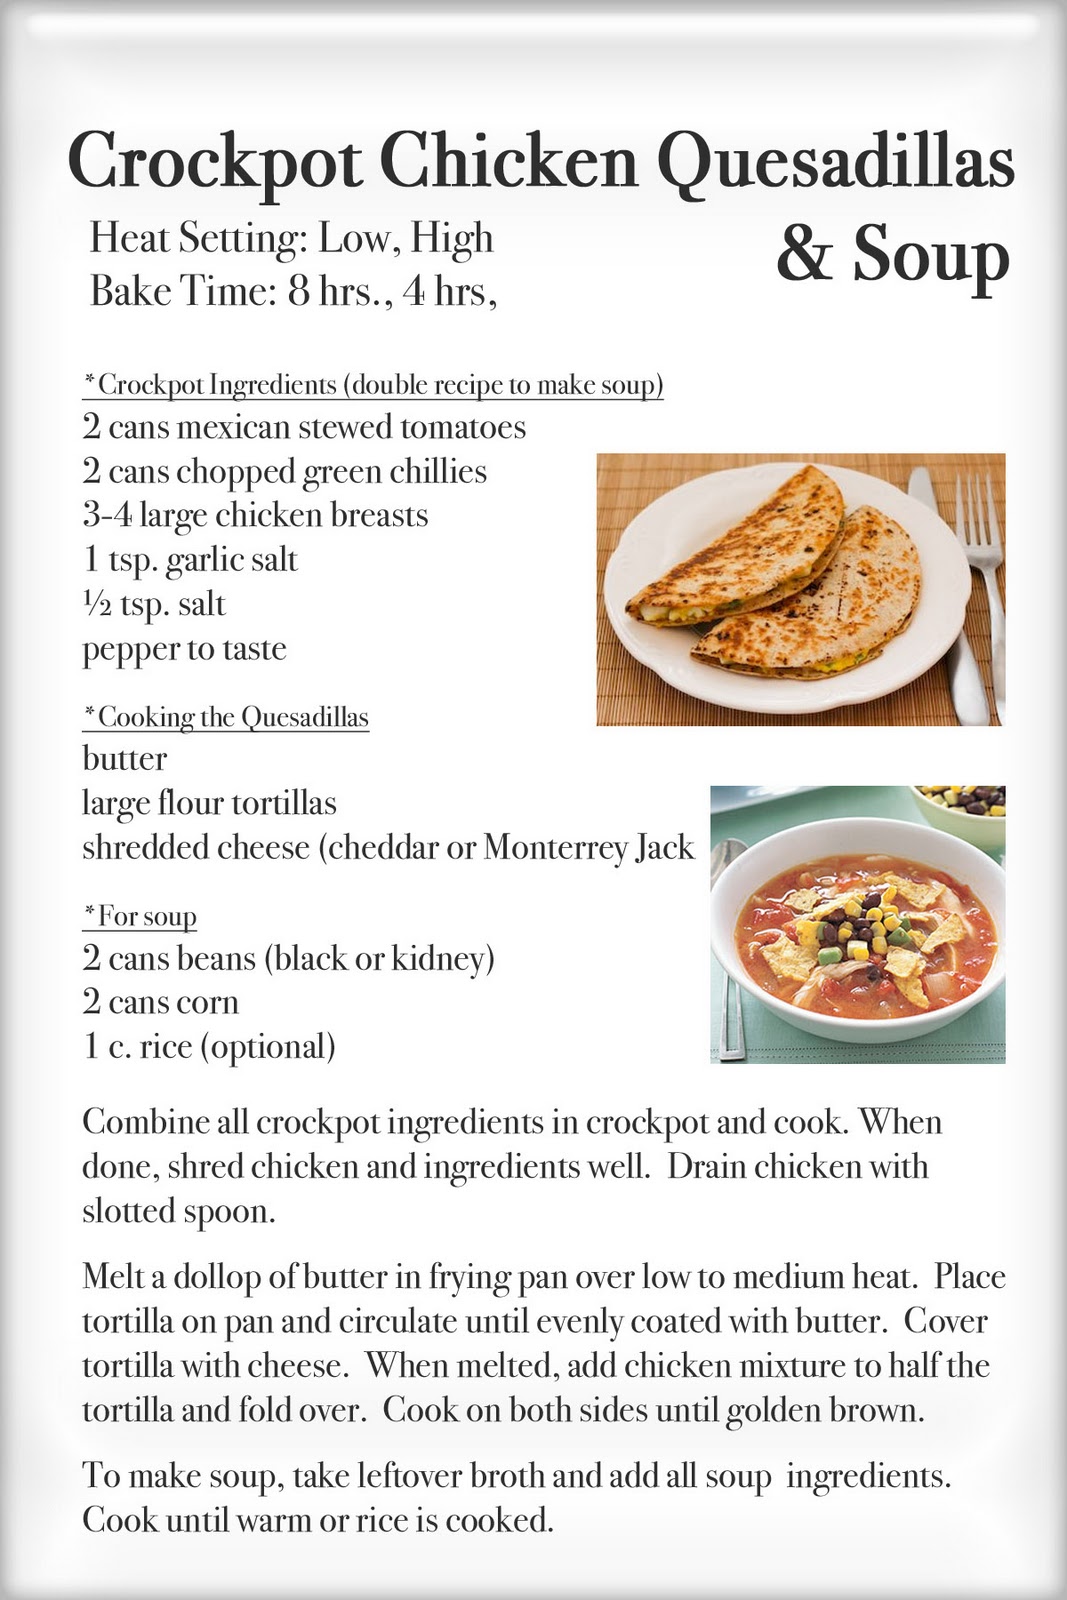 Cookie Nut Creations: Crockpot Chicken Quesadillas and Soup